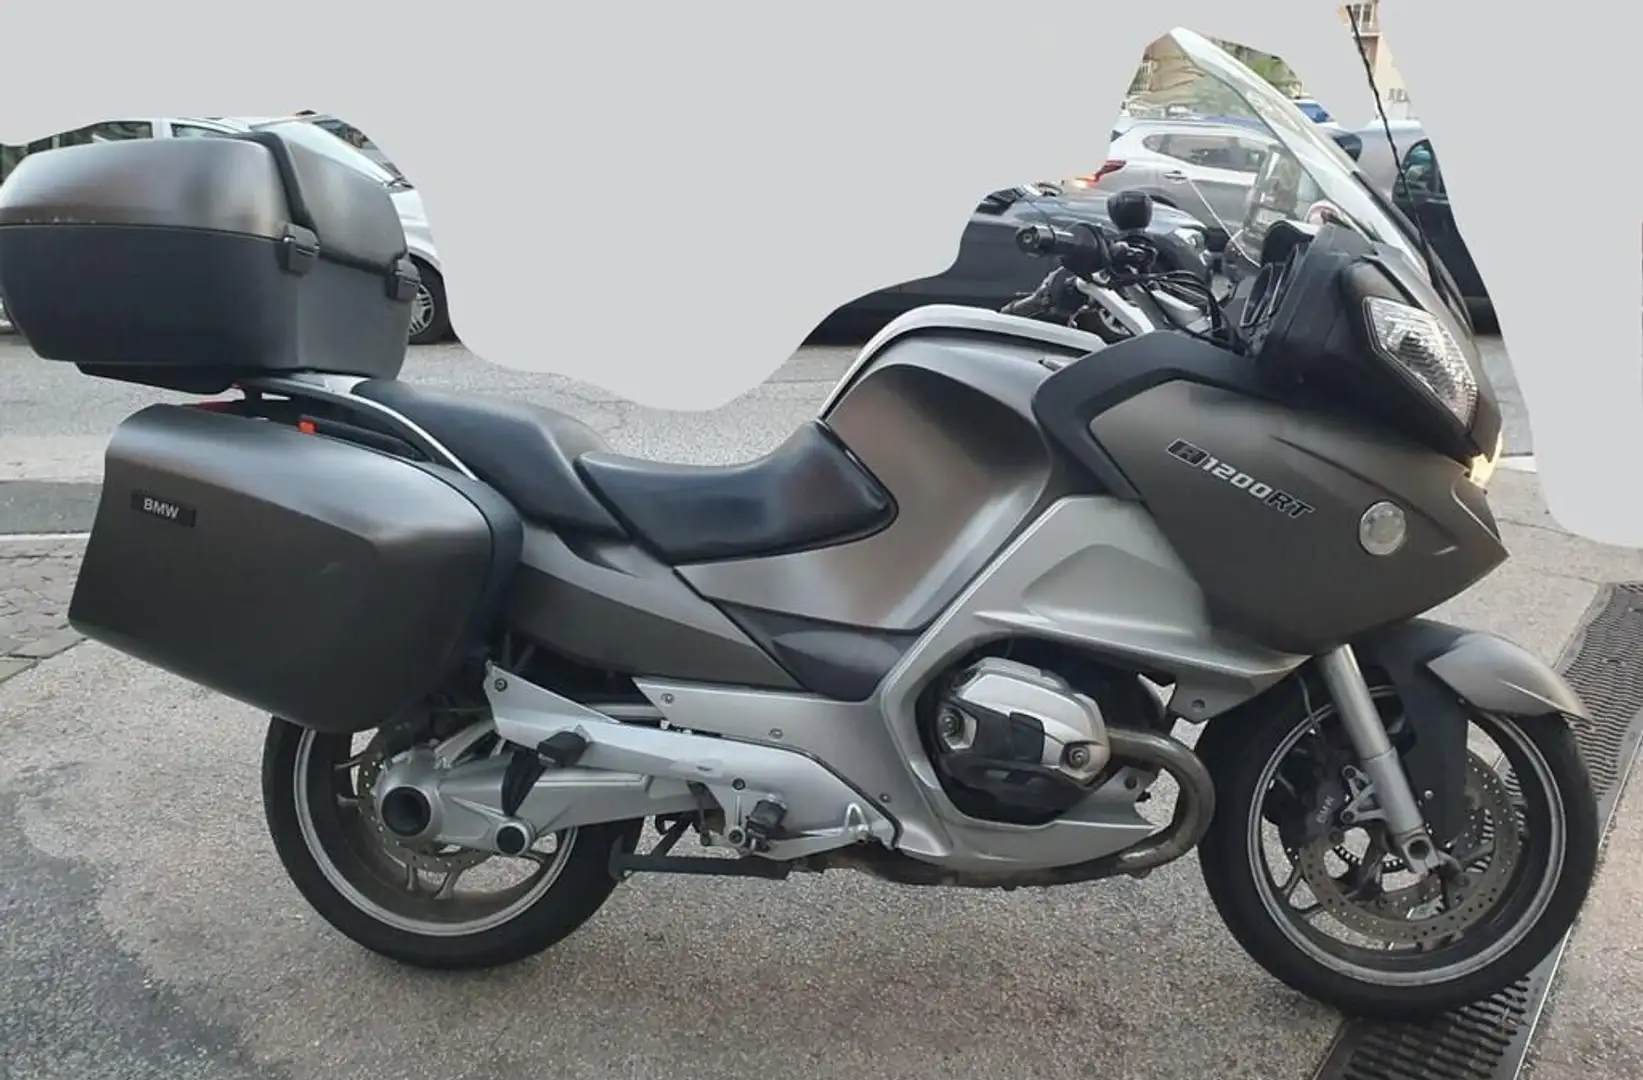 BMW R 1200 RT Abs my10 - 2